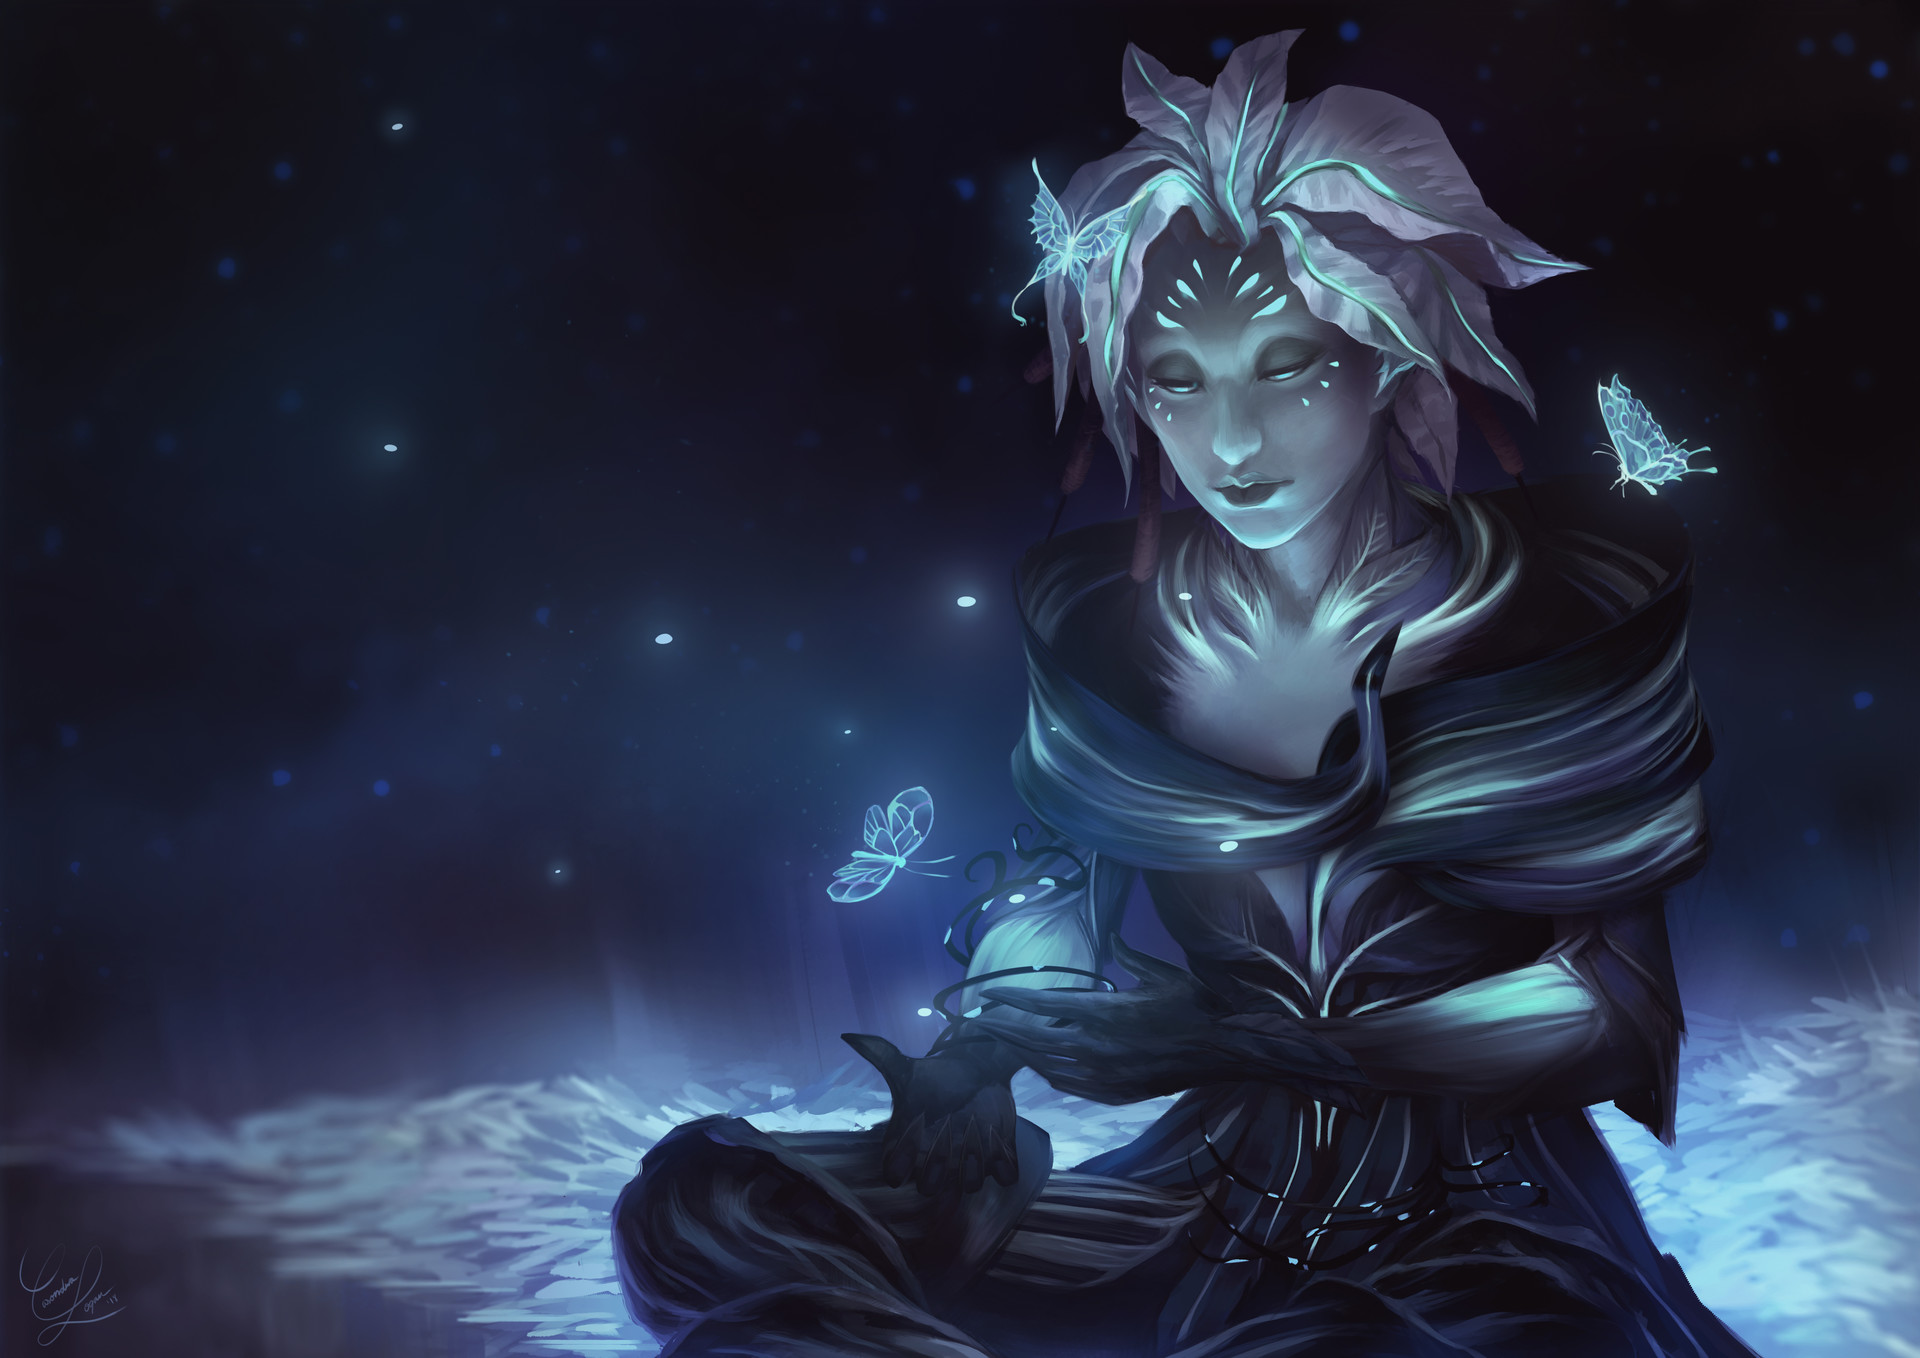 Fan Art of the Sylvari Caithe, from Guild Wars 2. This piece took too long ...